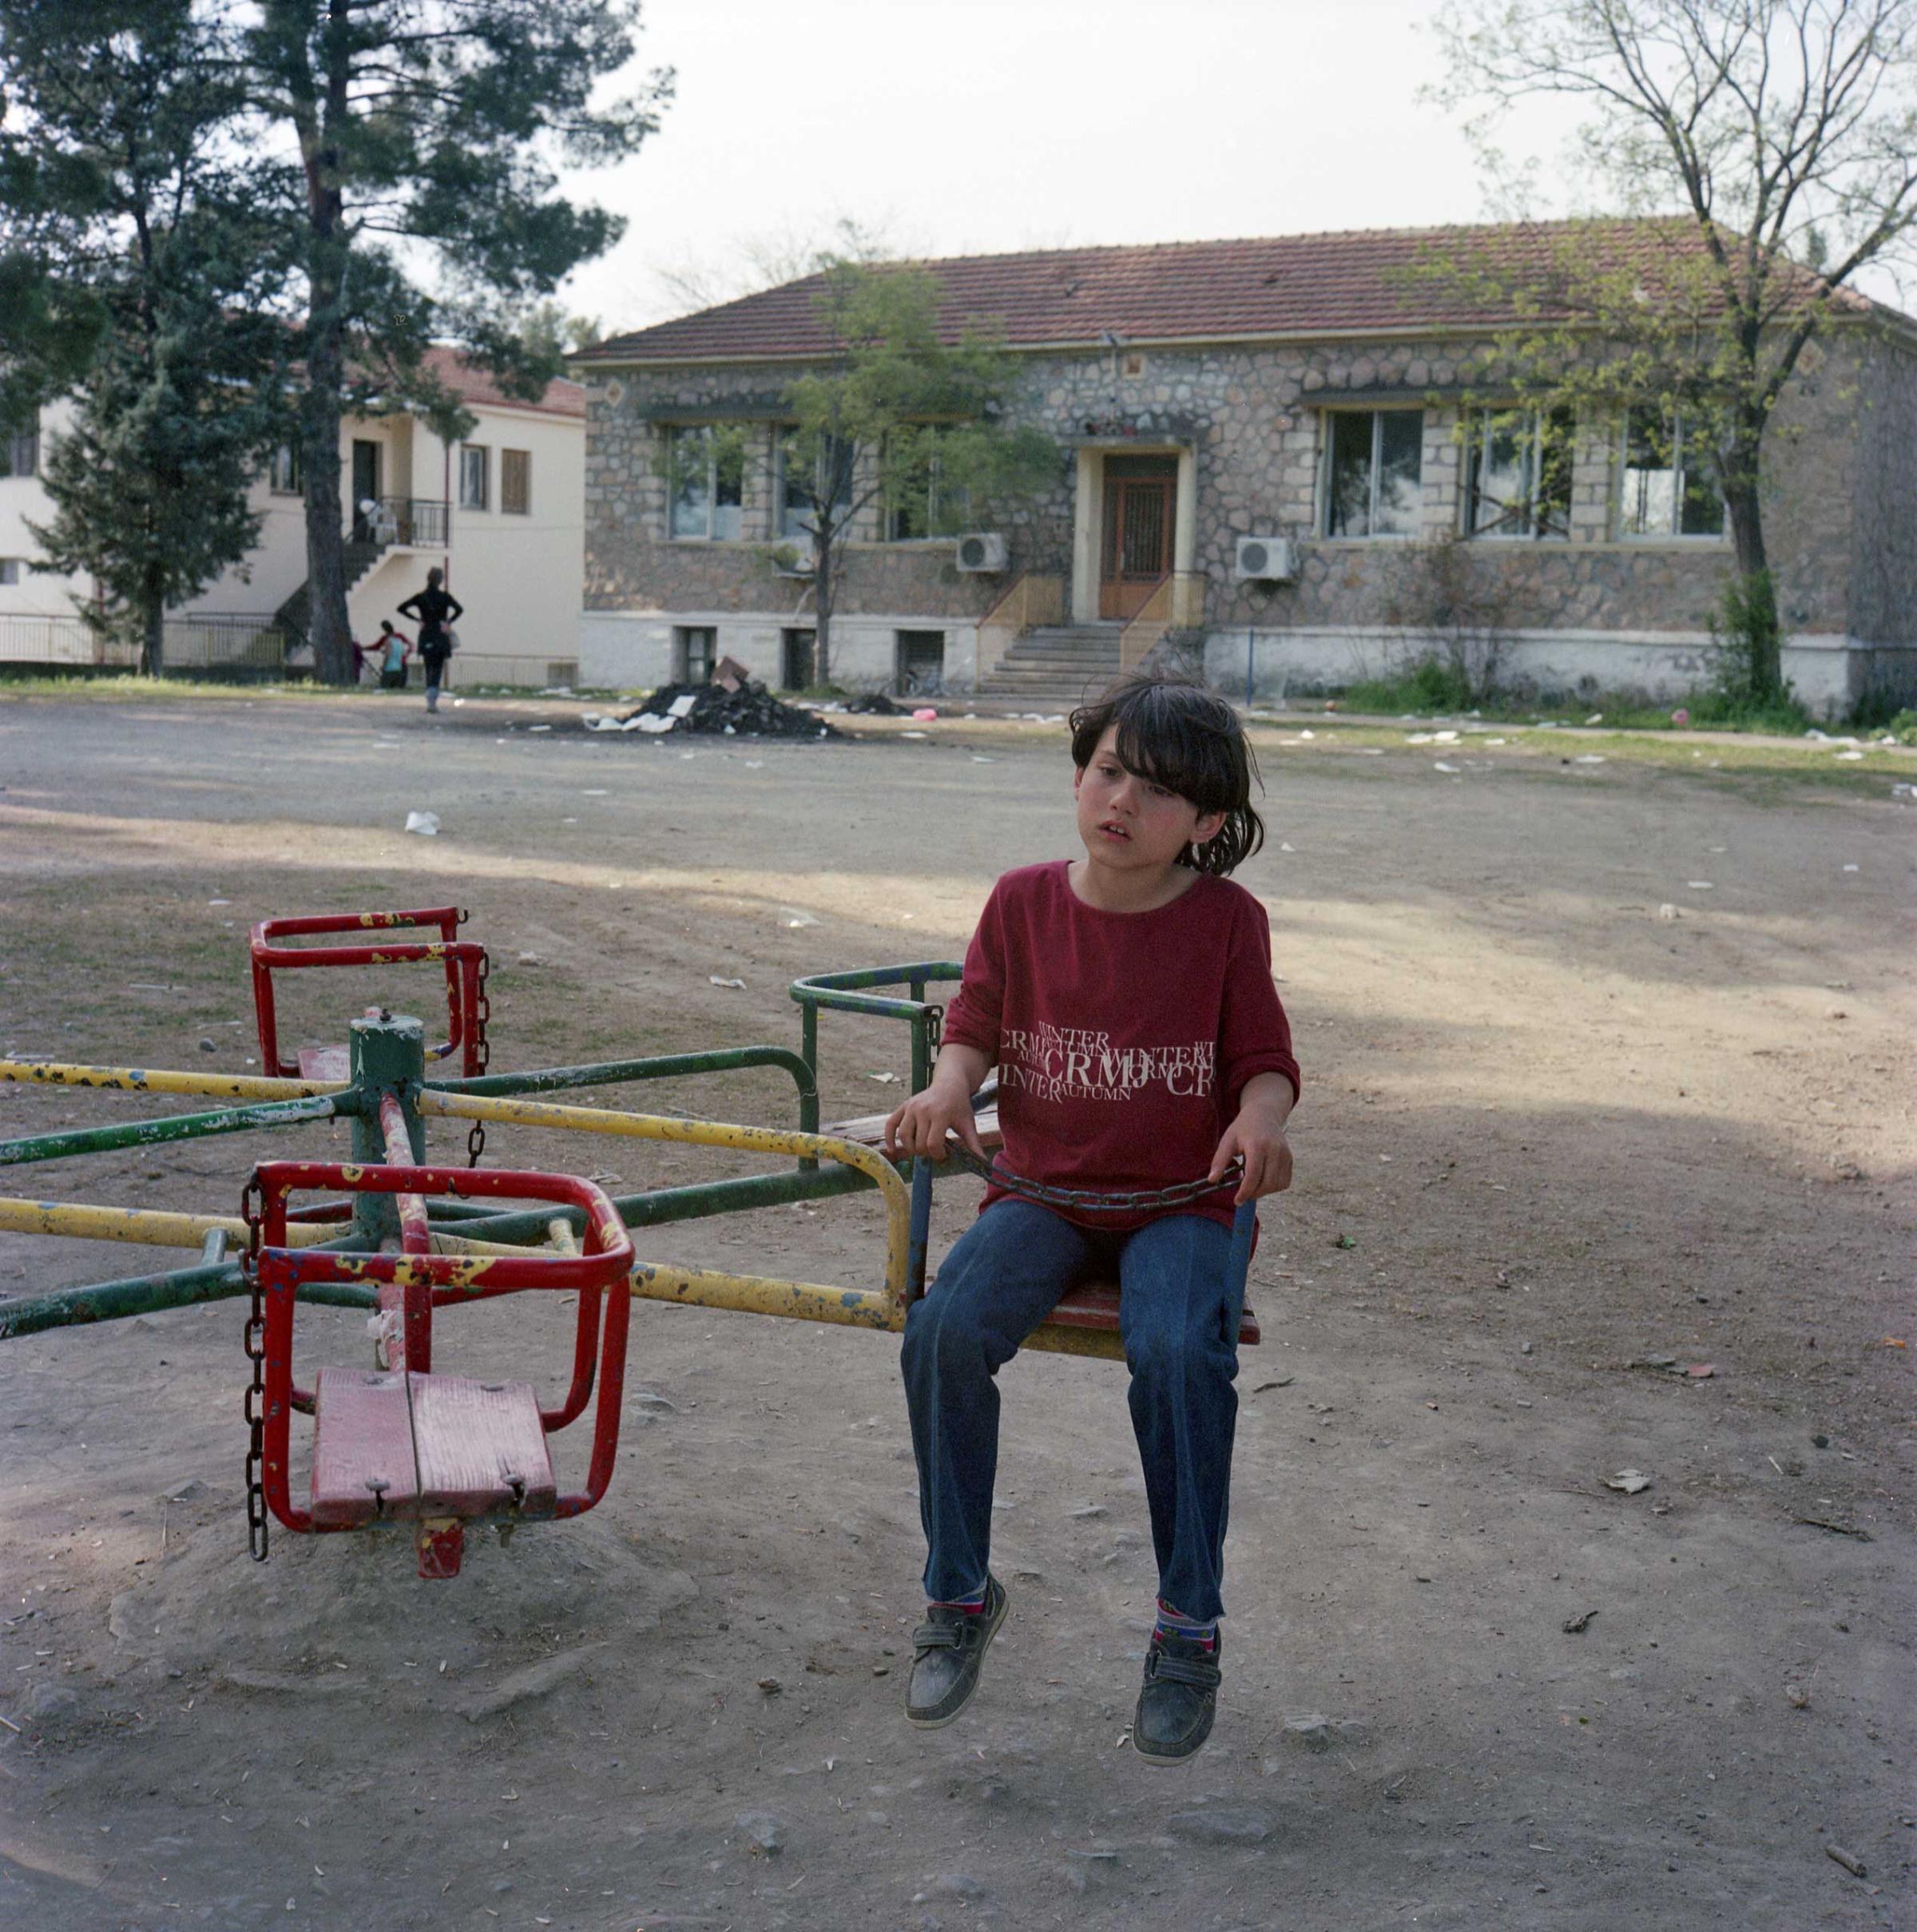 Syrian girl playing in a park outside a school in Idomeni. The school has been used as a storage for food supplies until it was recently looted. Idomeni, Greece. April, 2016